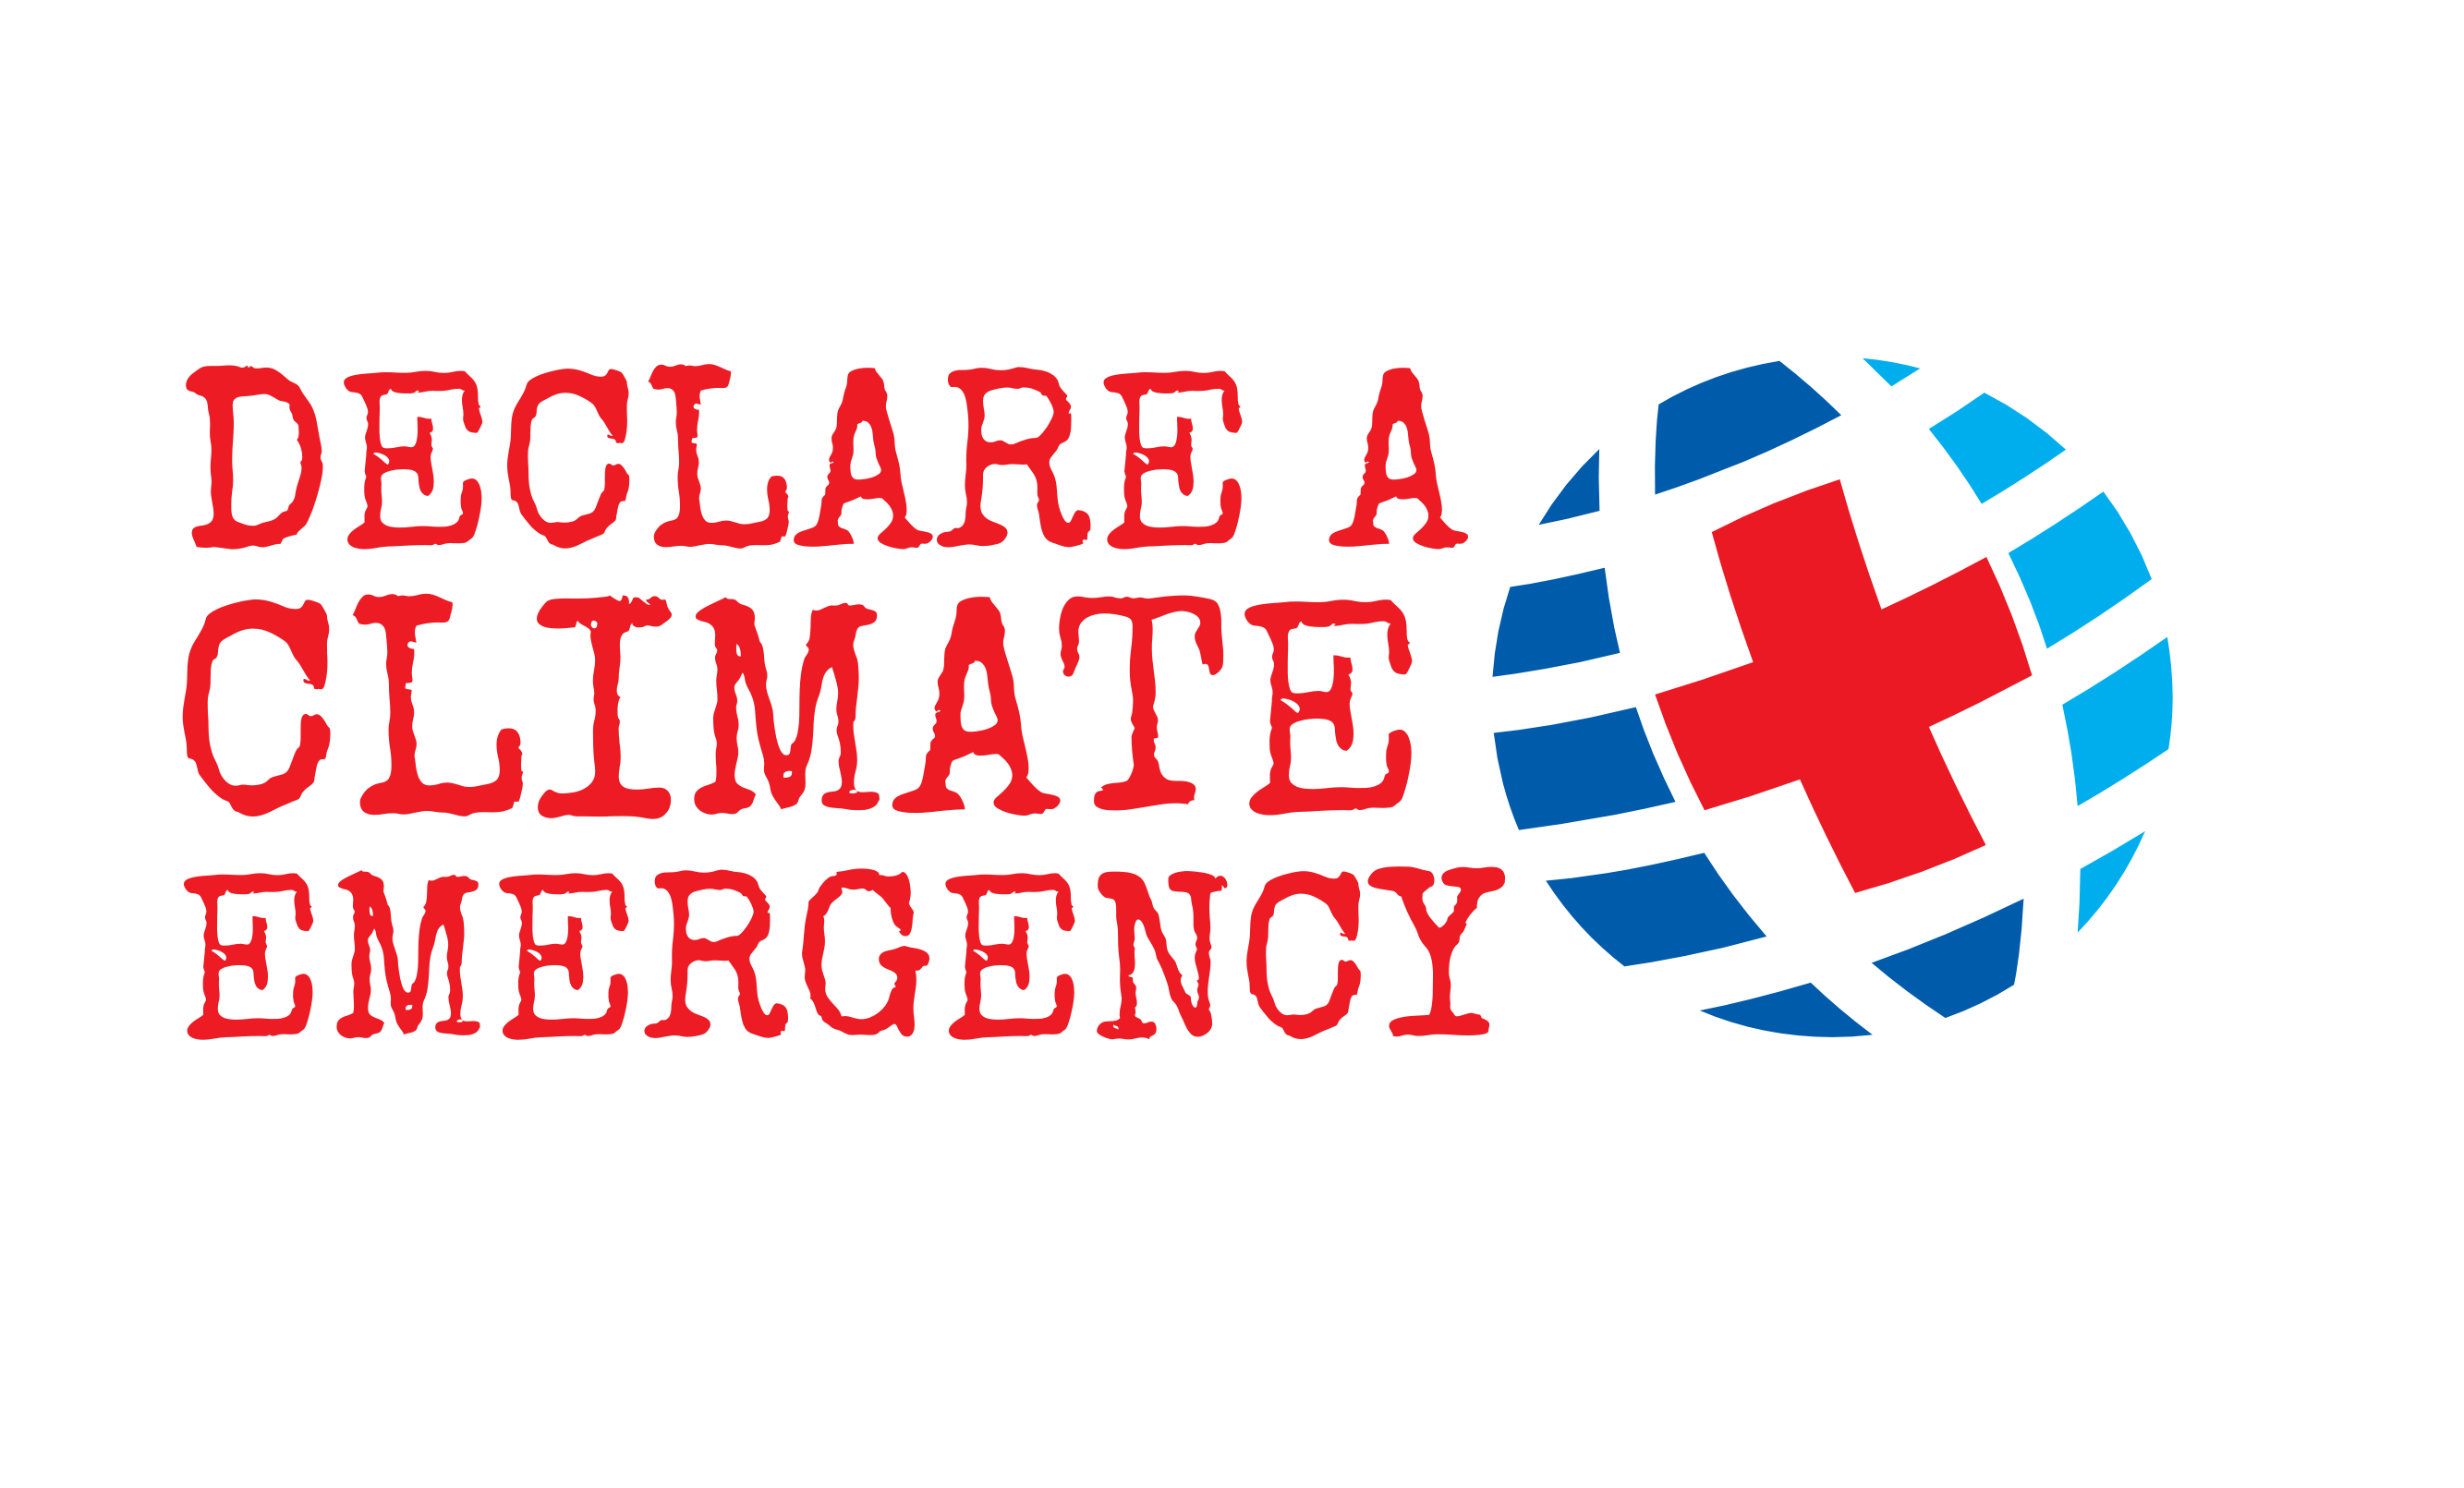 Has your council declared a Climate Emergency?